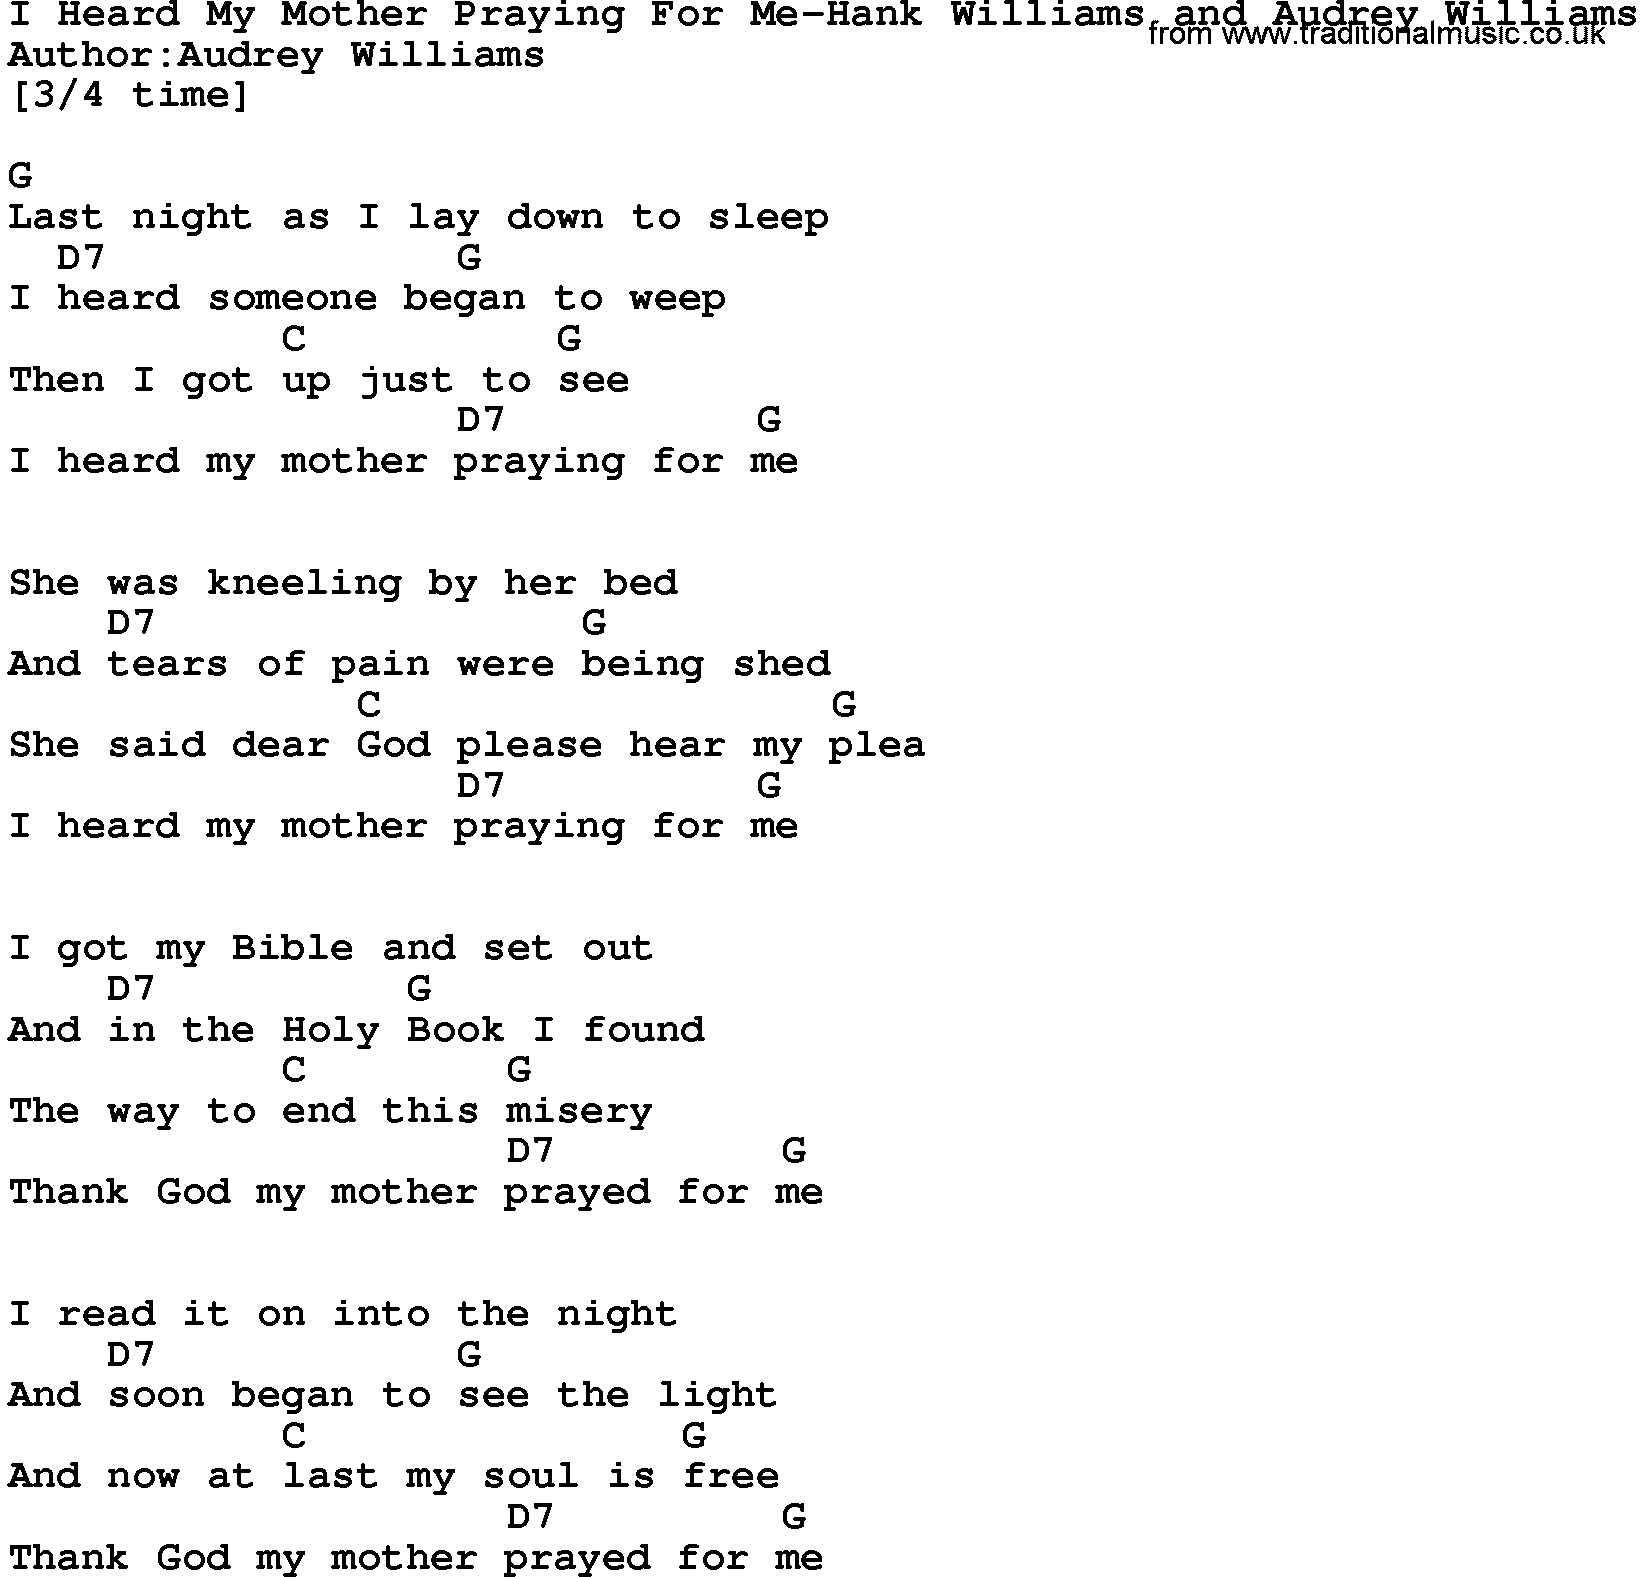 Country music song: I Heard My Mother Praying For Me-Hank Williams And Audrey Williams lyrics and chords